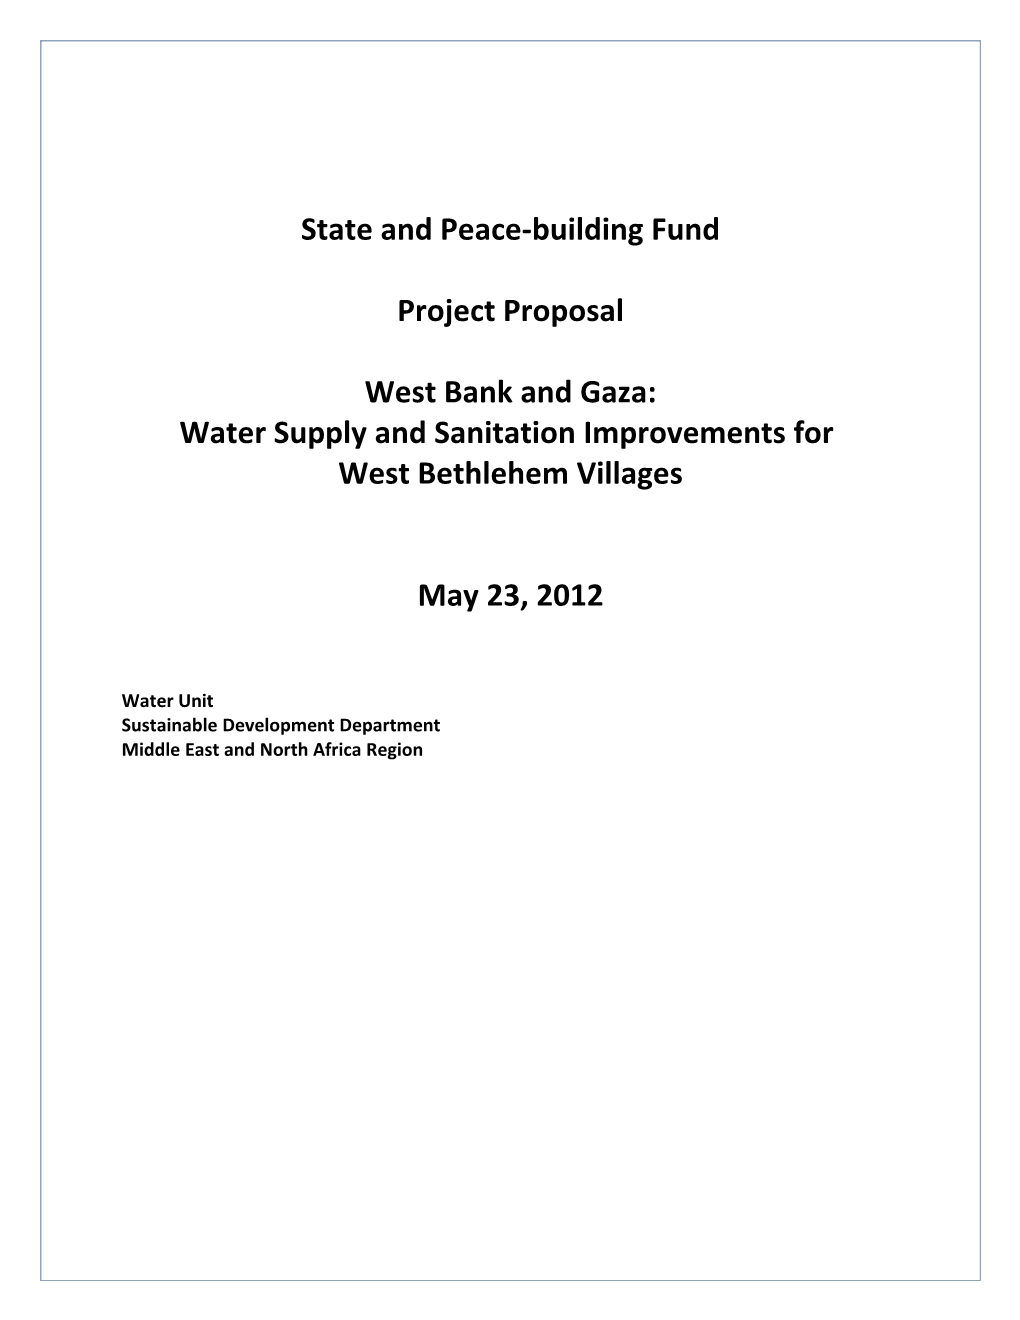 State and Peace-Building Fund